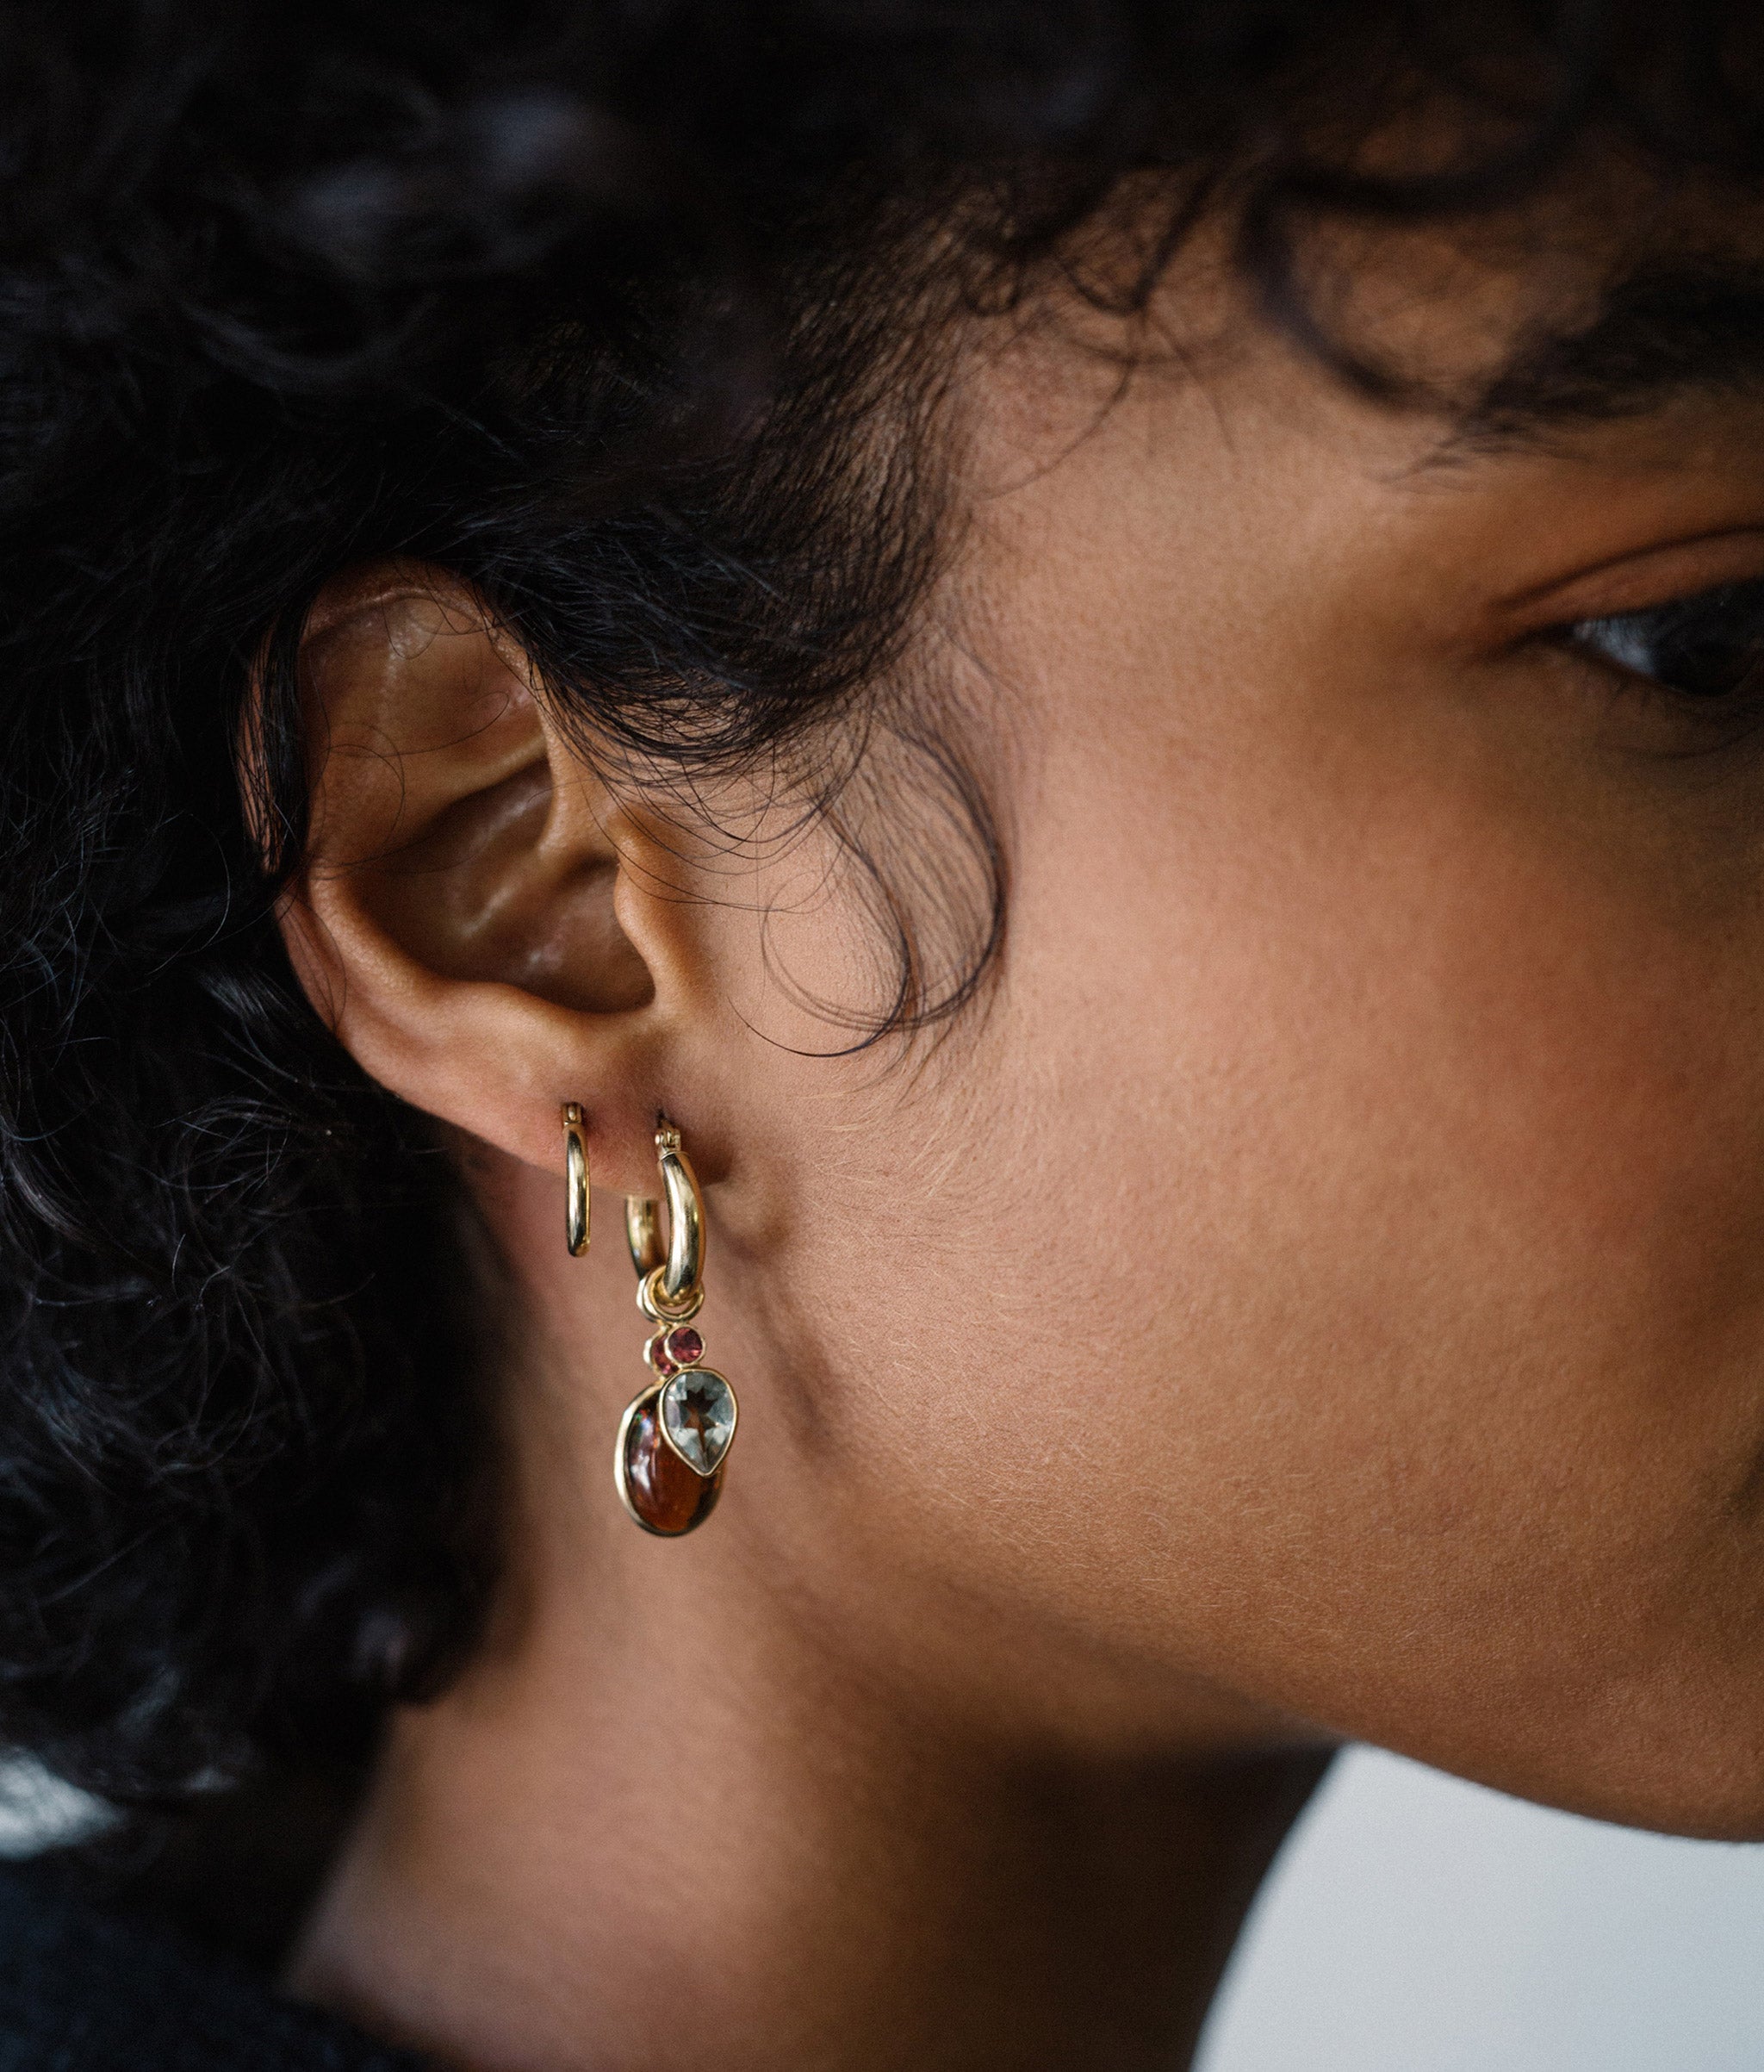 Model in close-up profile wearing the 12mm 14k gold hoop earrings with charms.